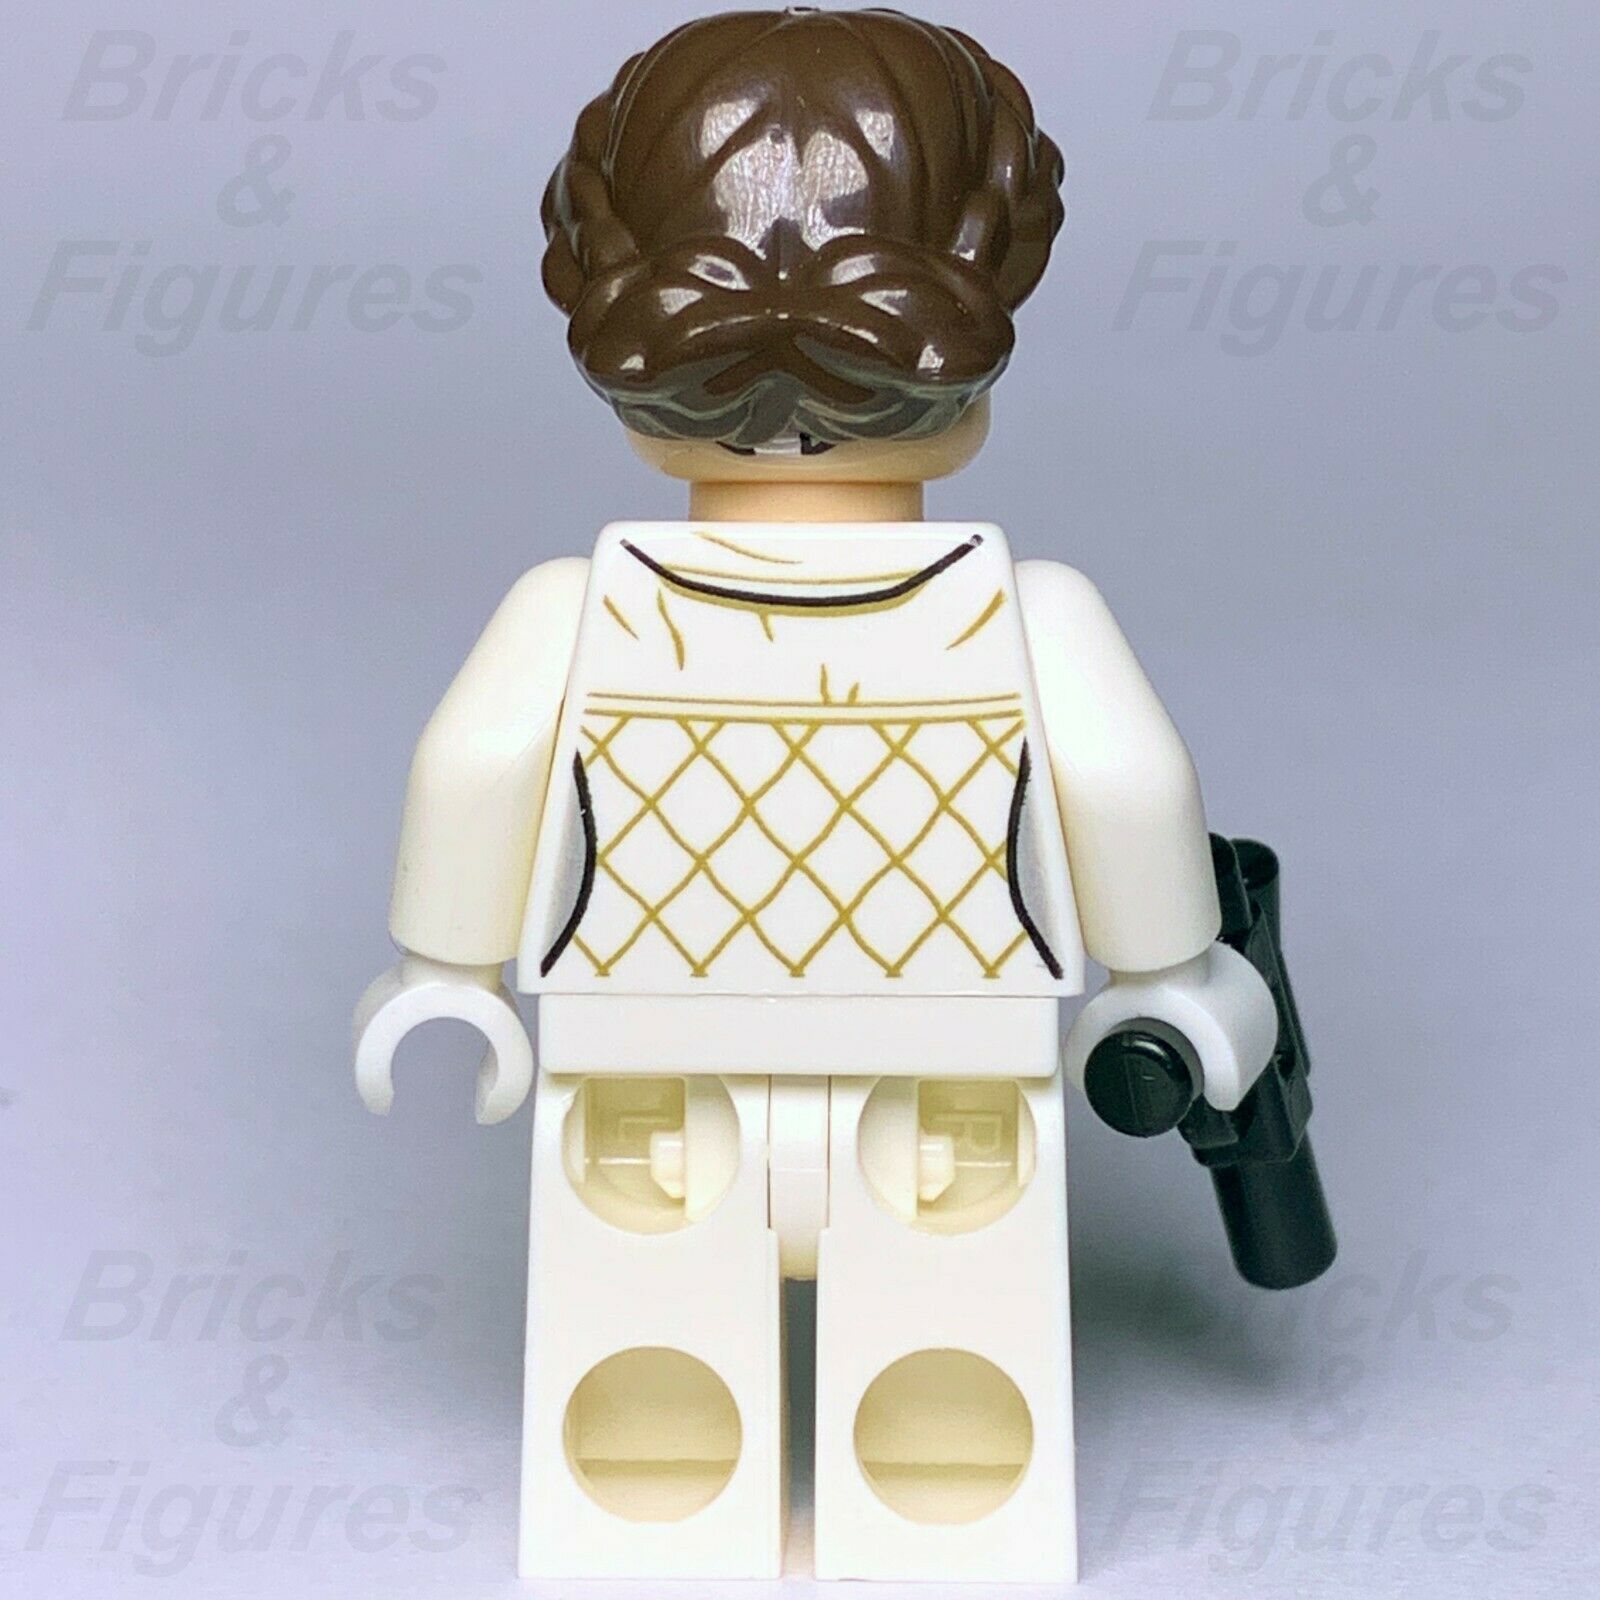 New Star Wars LEGO Princess Leia Hoth Outfit Minifigure from set 75192 Genuine - Bricks & Figures